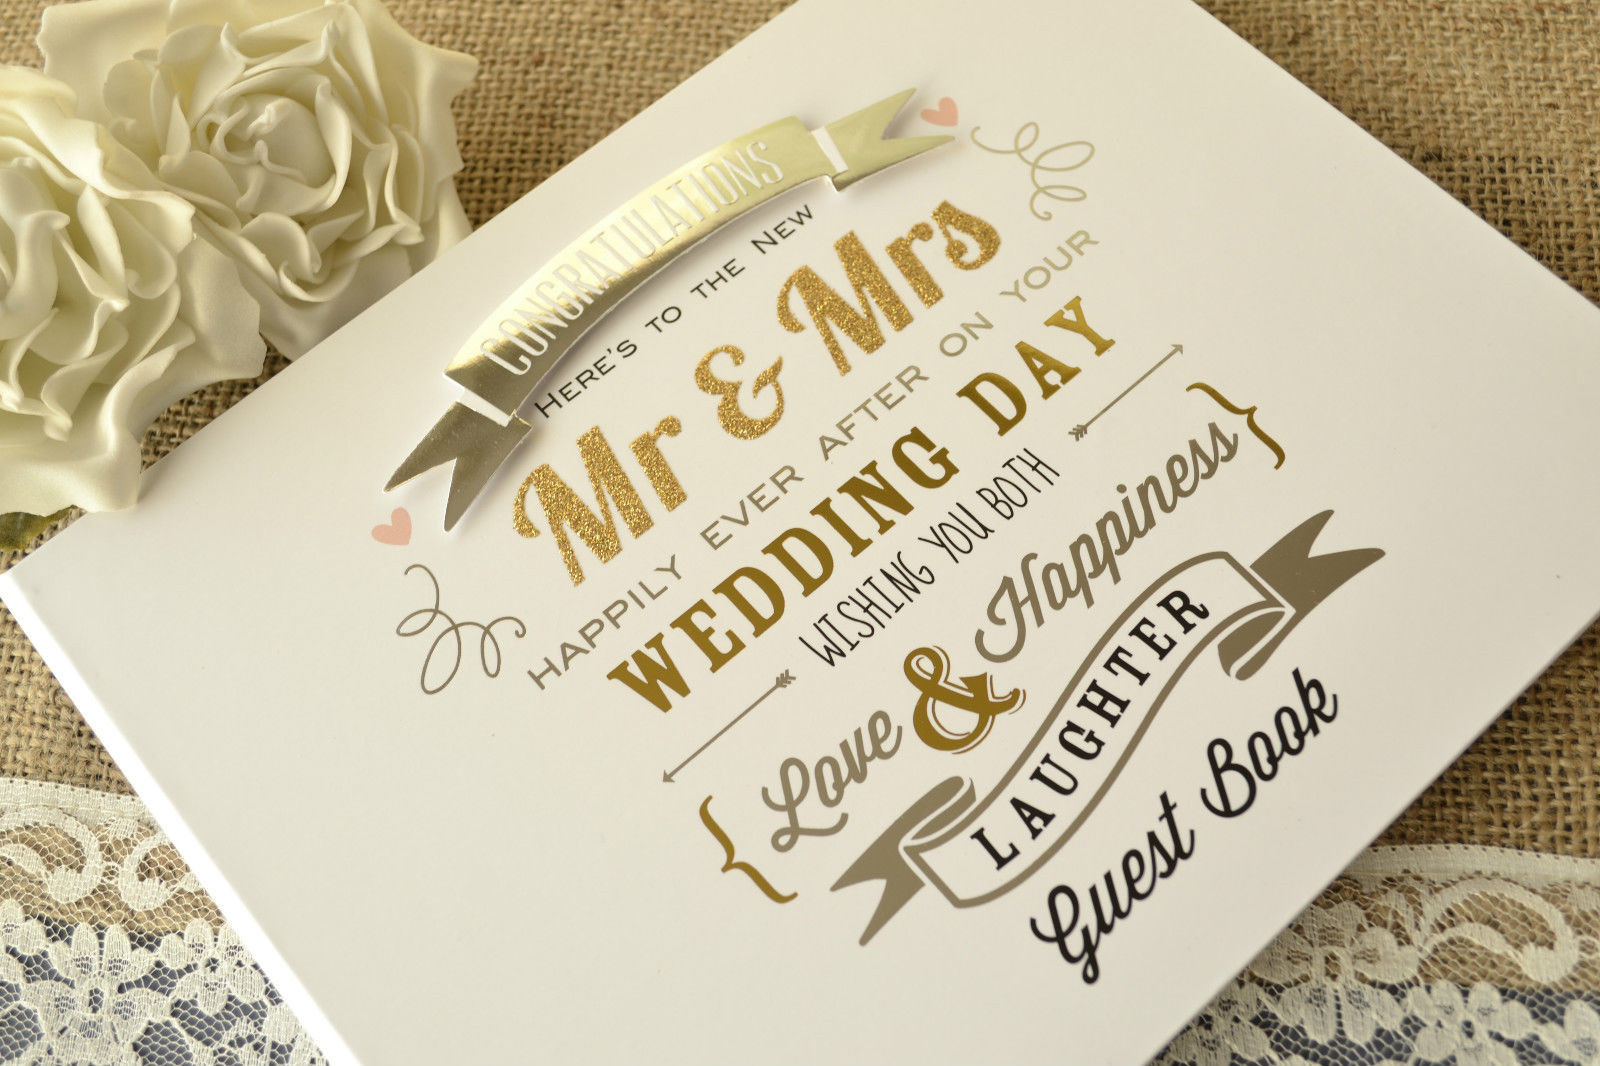 Wedding Guest Book Ideas Uk
 The 5 Most mon Things Brides For To Organise For